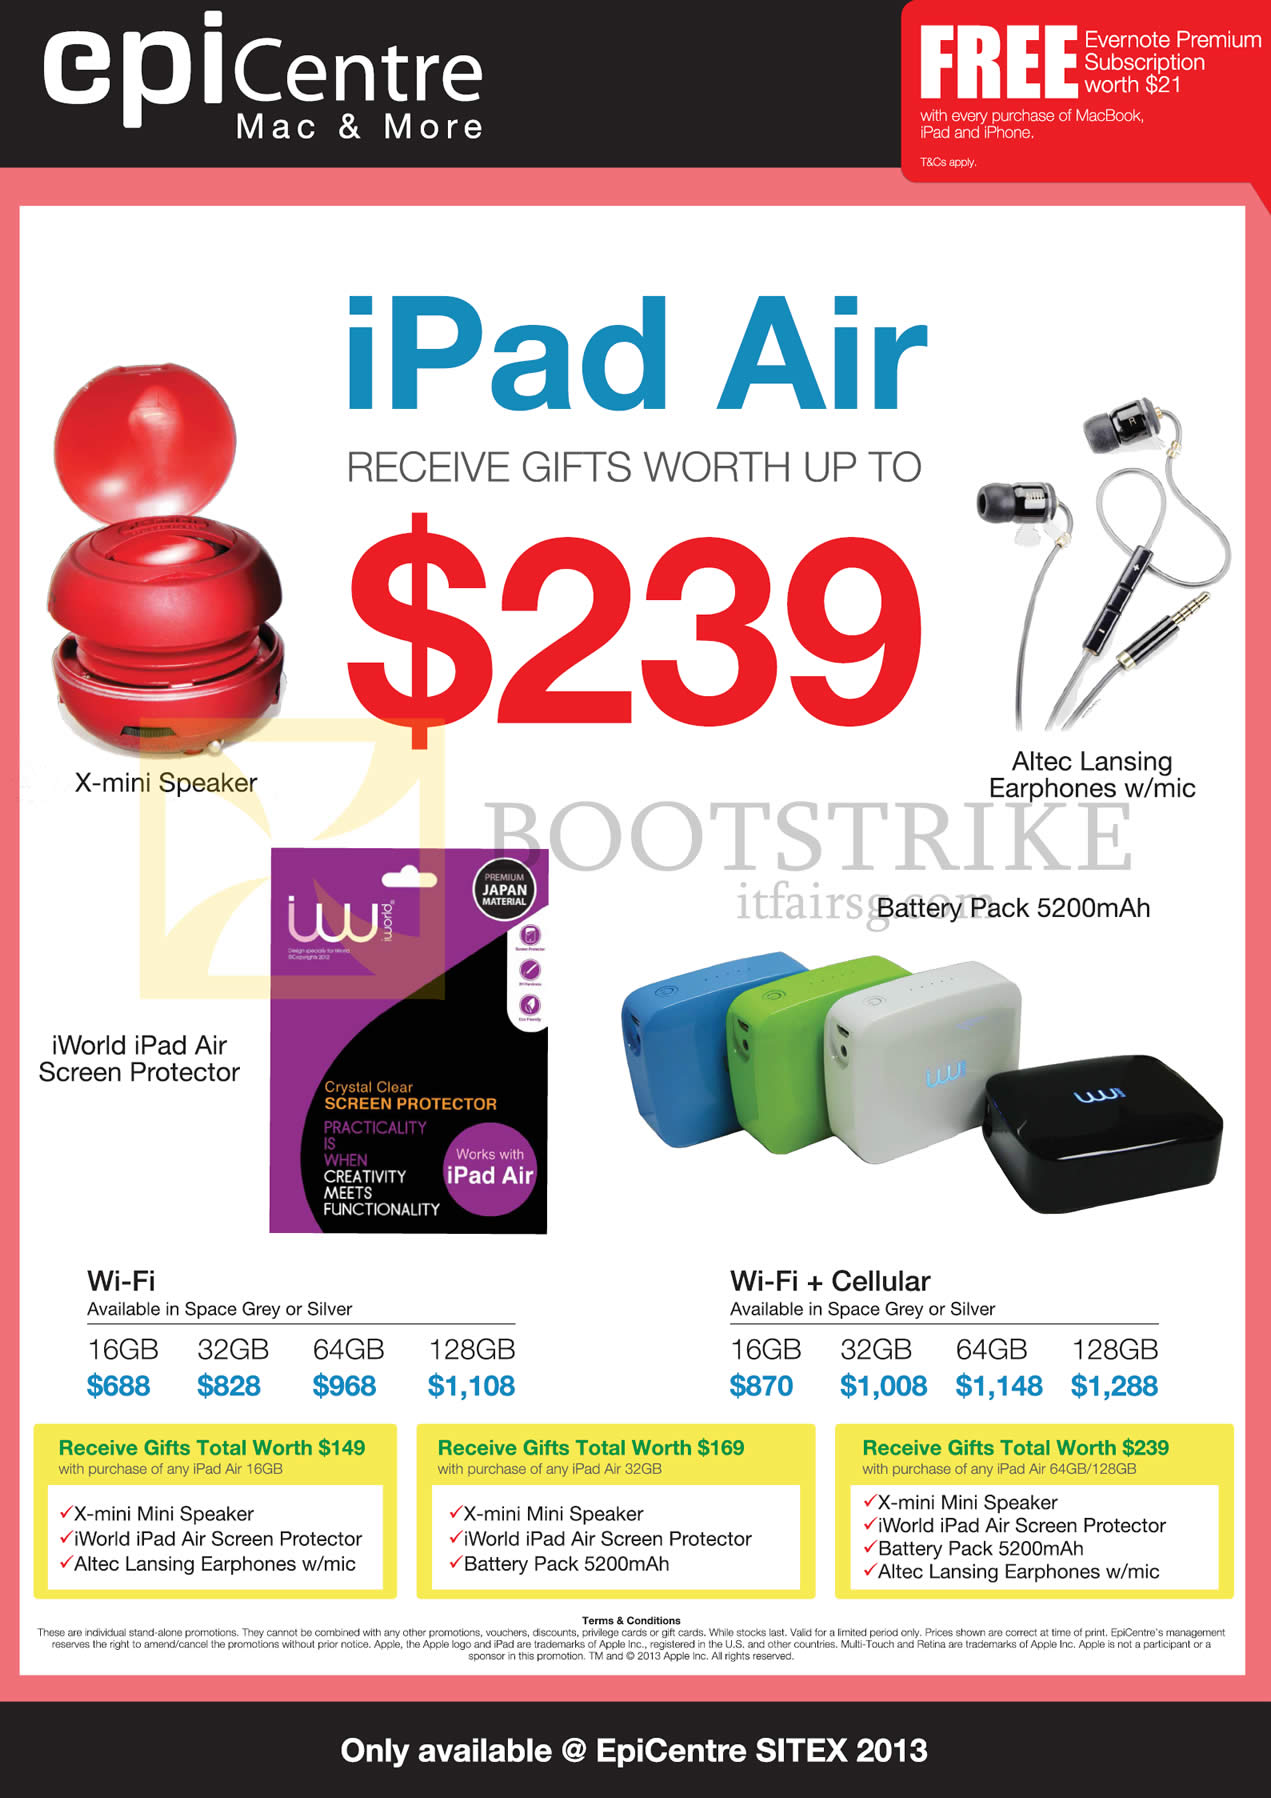 SITEX 2013 price list image brochure of EpiCentre Apple IPad Air Tablet Wi-Fi Cellular, Free Gifts, 16GB 32GB 64GB 128GB